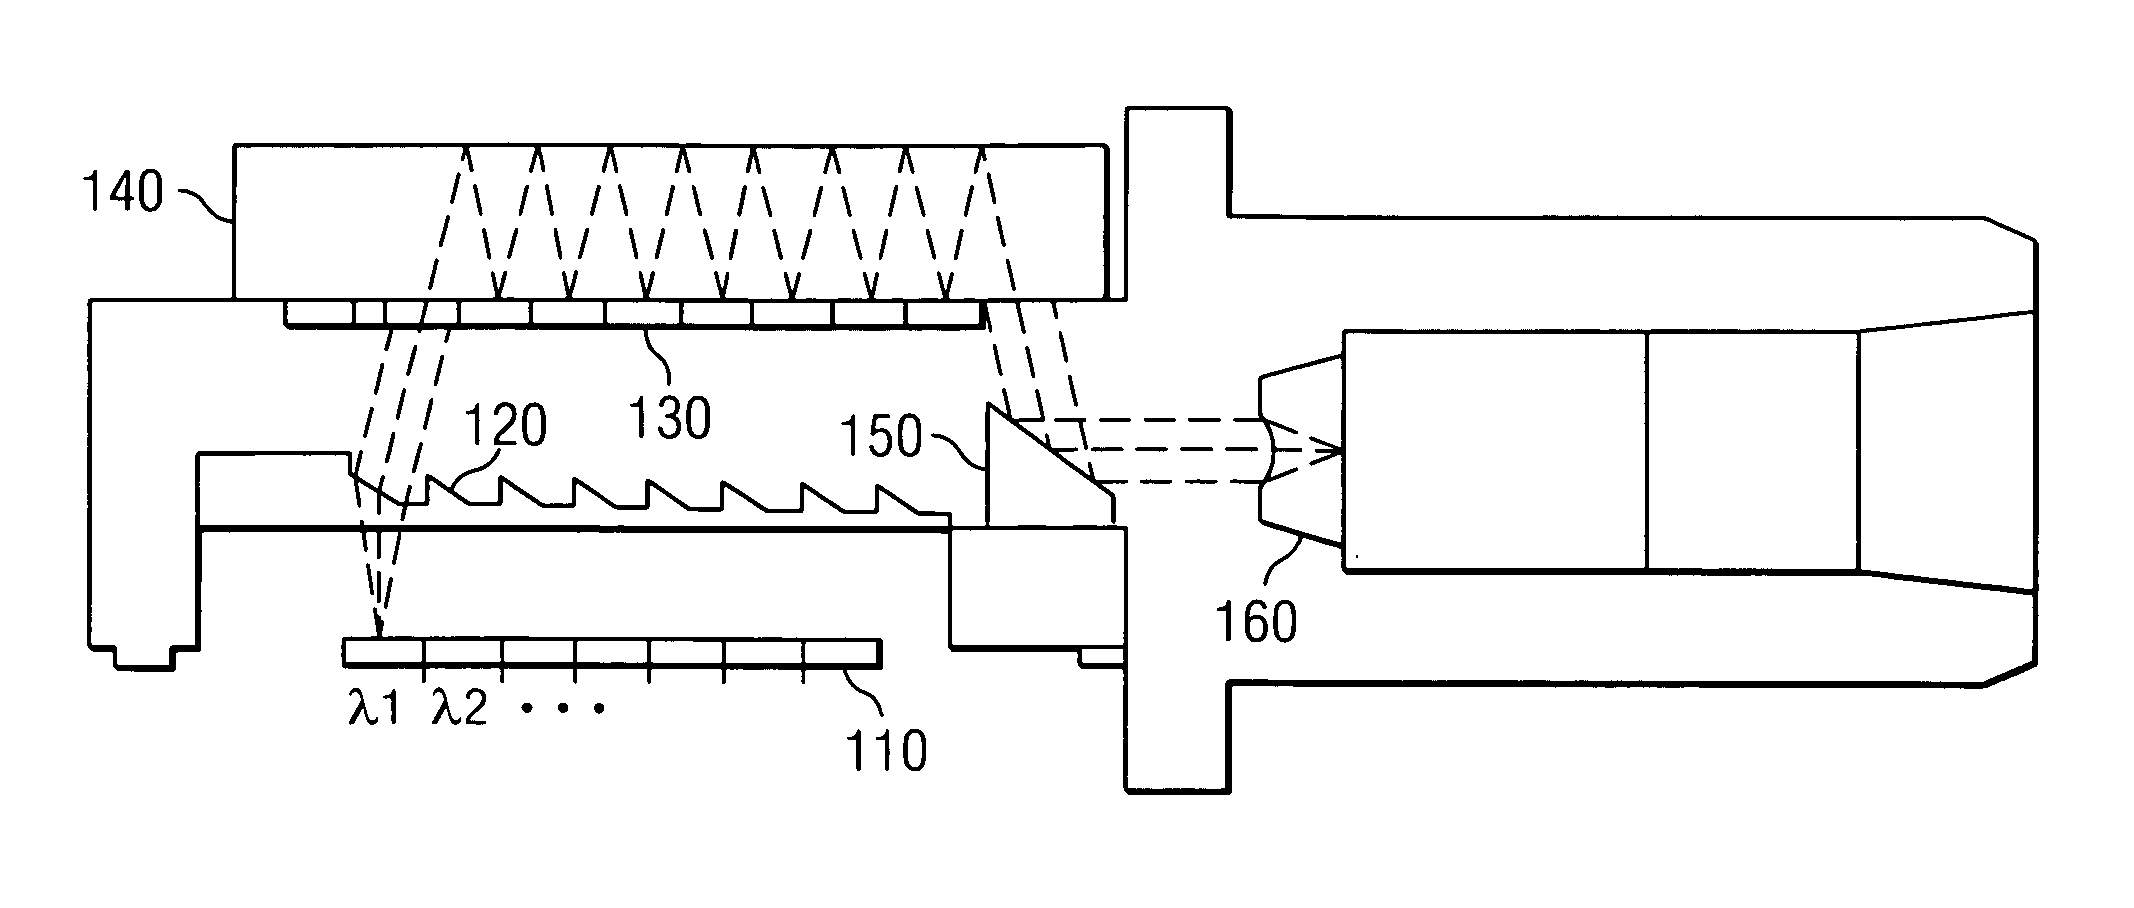 Method and apparatus for wavelength division multiplexing